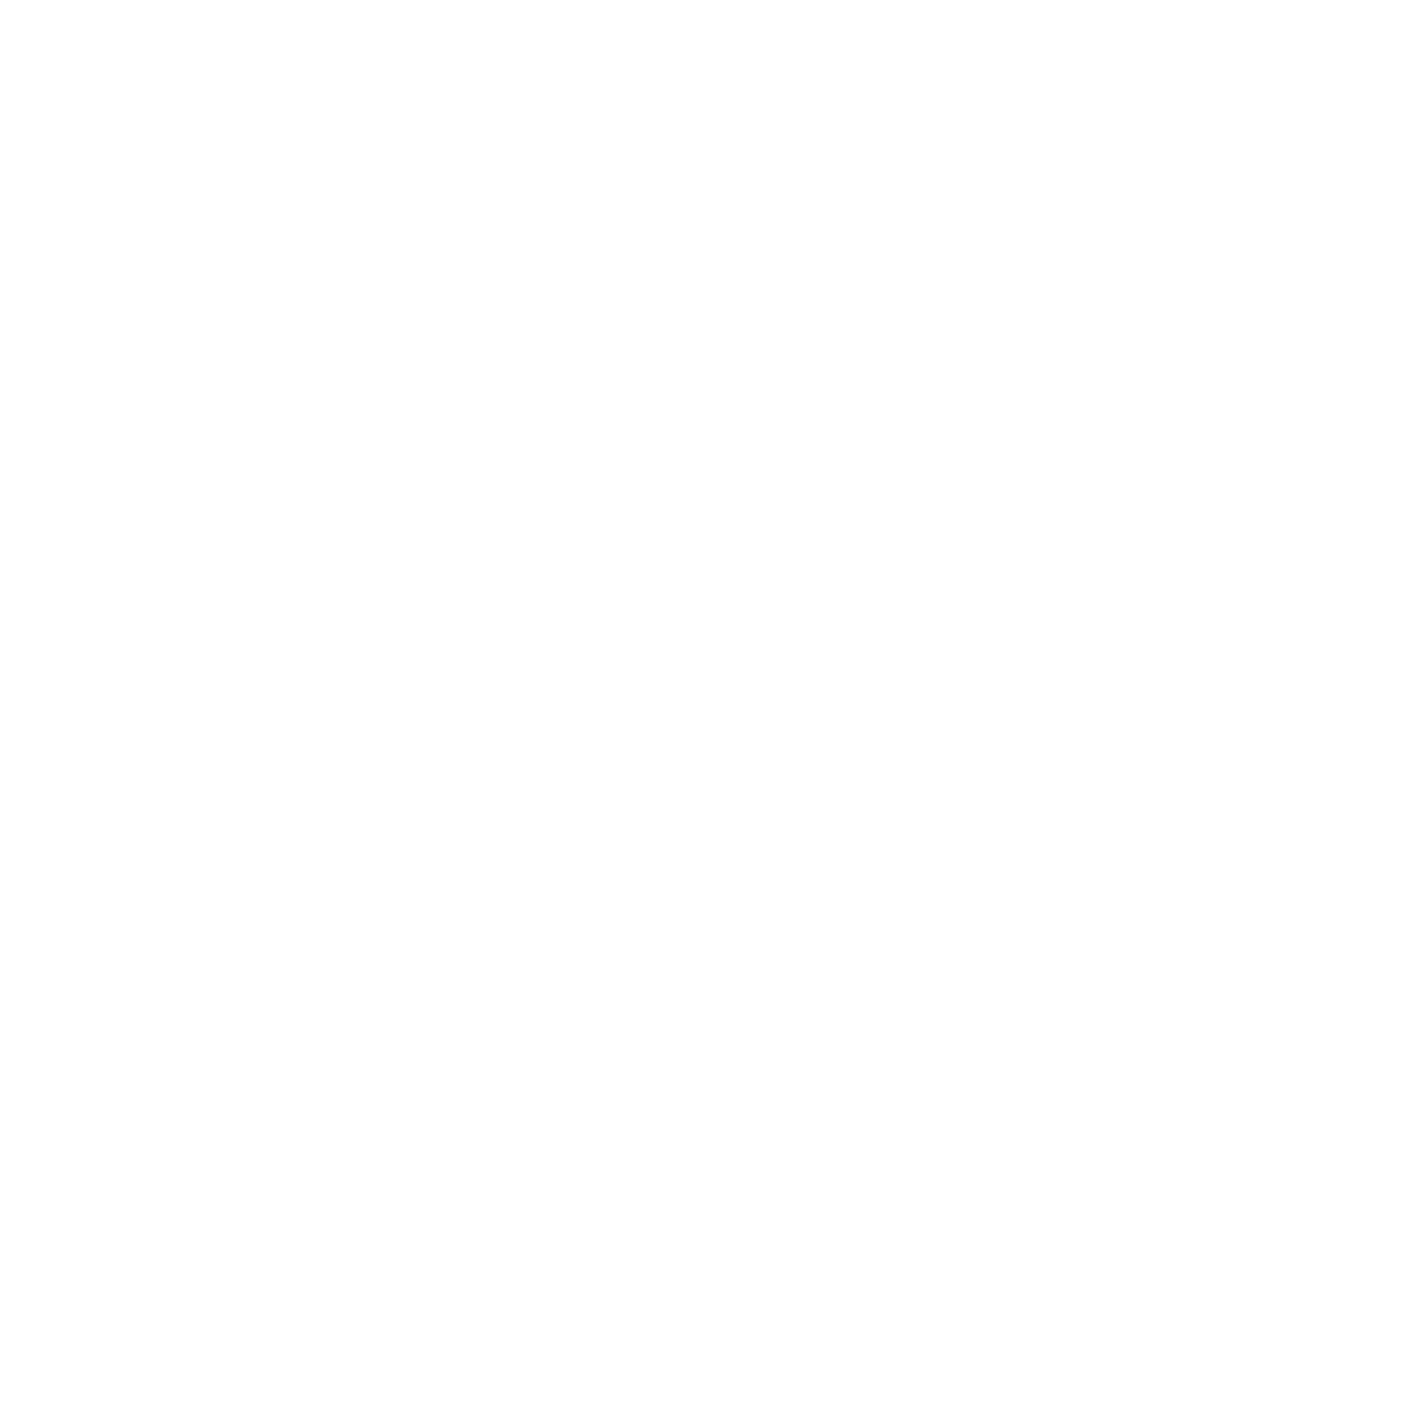 Barry & Son Firearms & Military Collectables